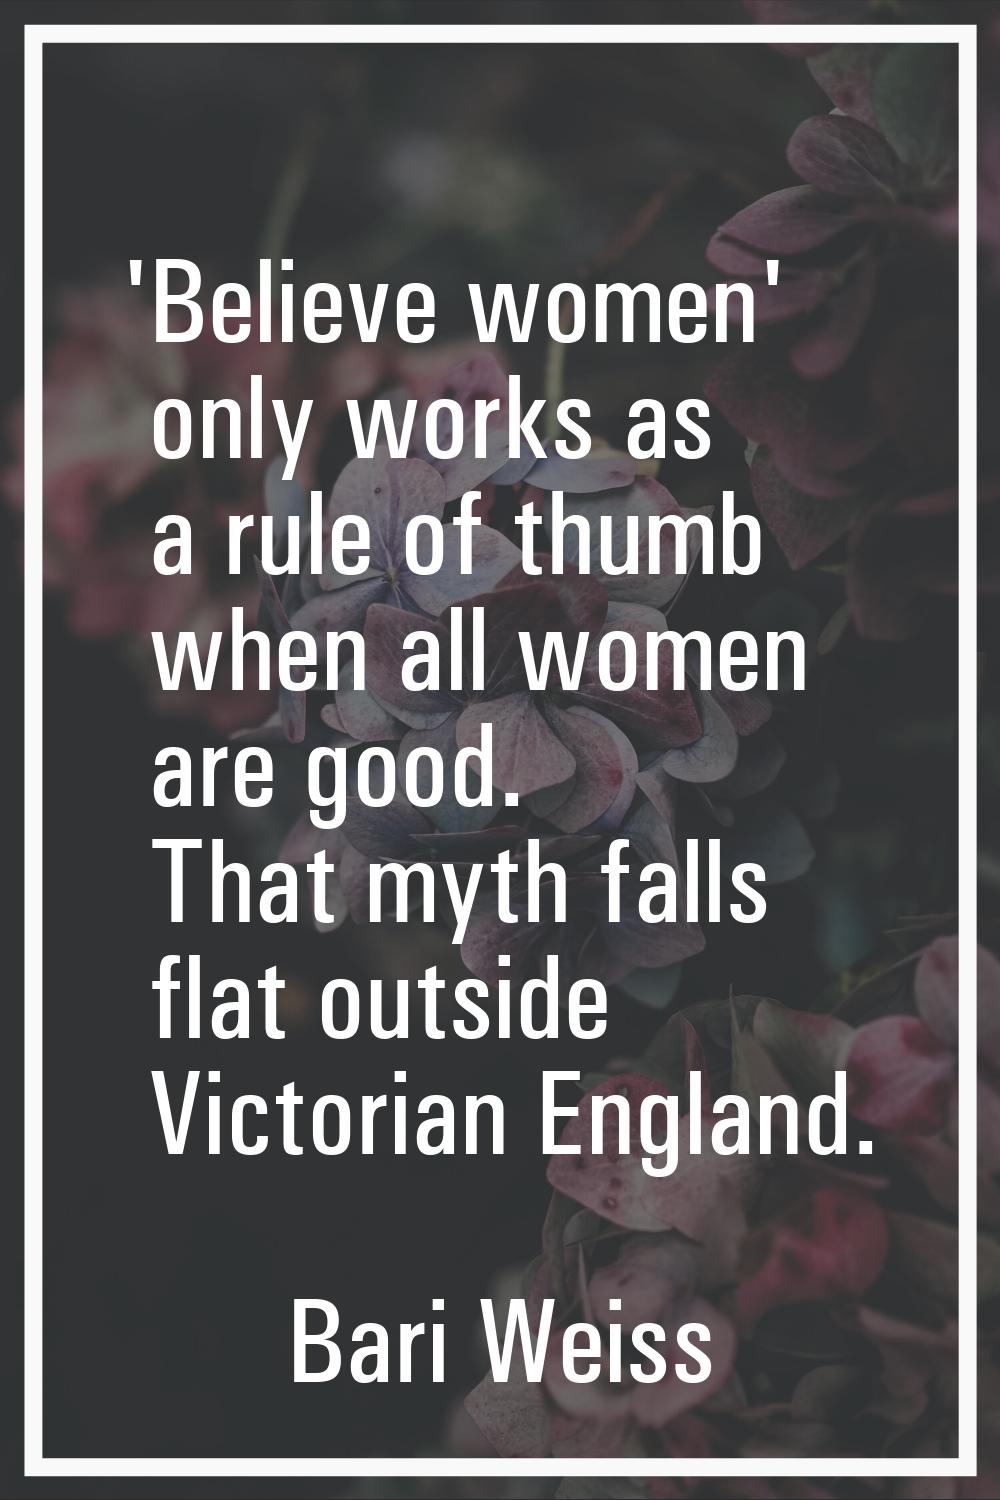 'Believe women' only works as a rule of thumb when all women are good. That myth falls flat outside